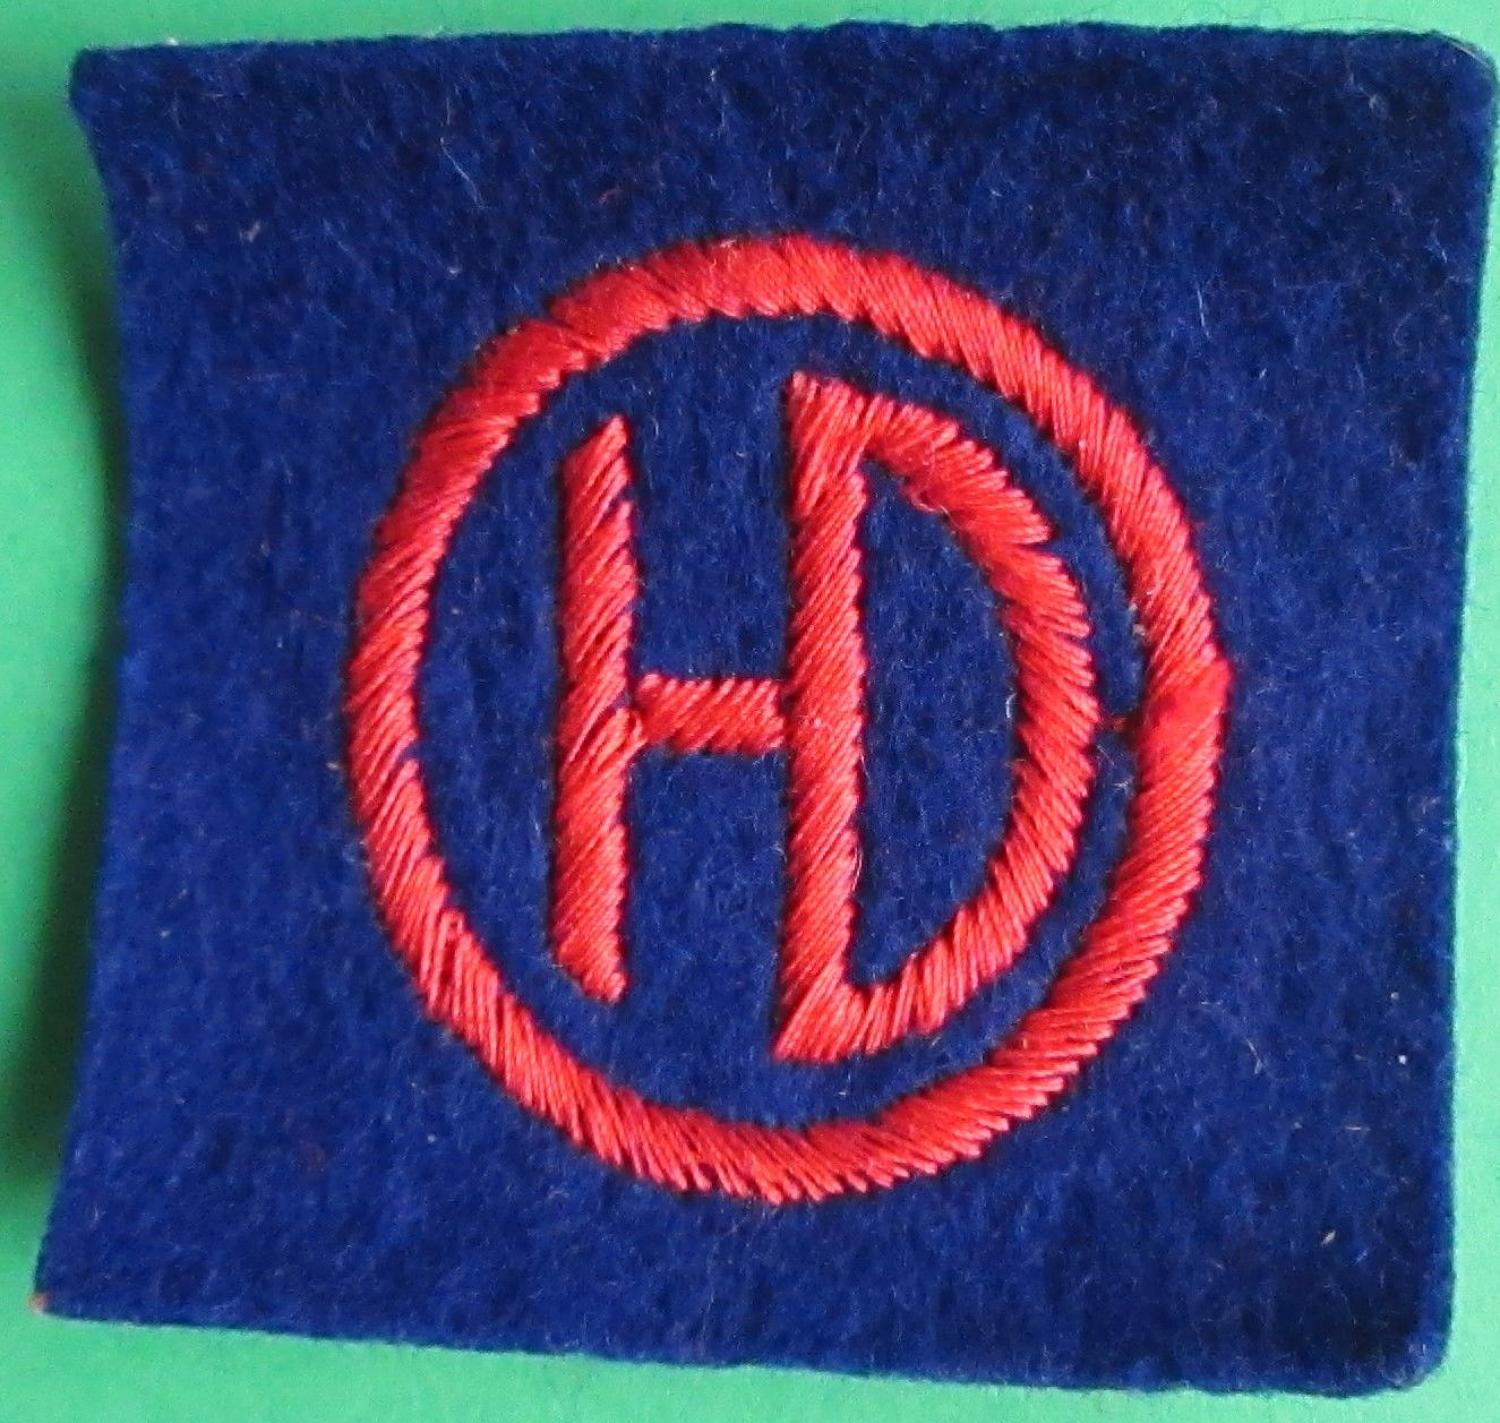 A PASTE BACK HIGHLAND DIVISION FORMATION PATCH